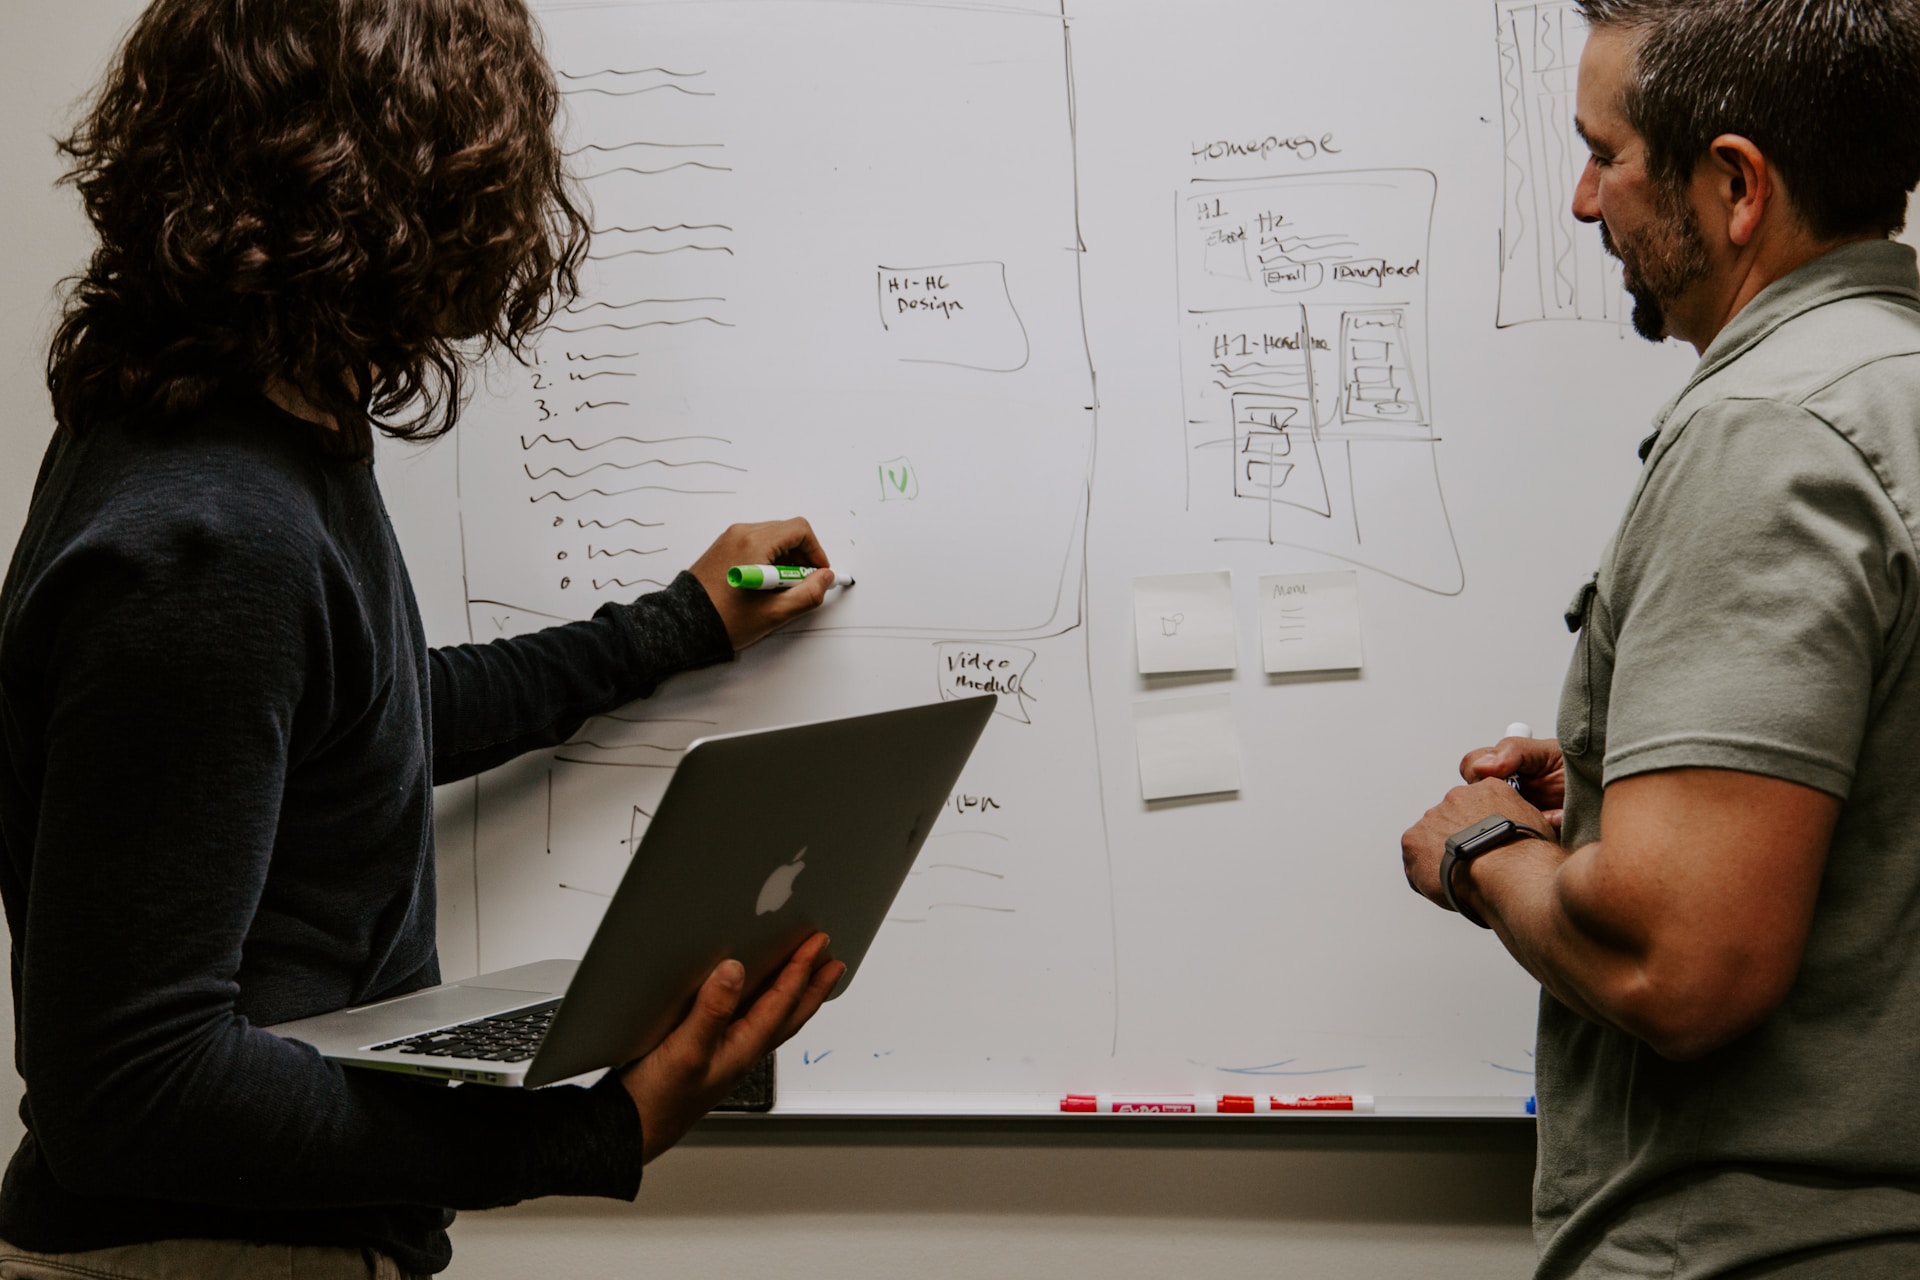 Two colleagues collaborate on a design by drawing it out on a whiteboard while holding a laptop